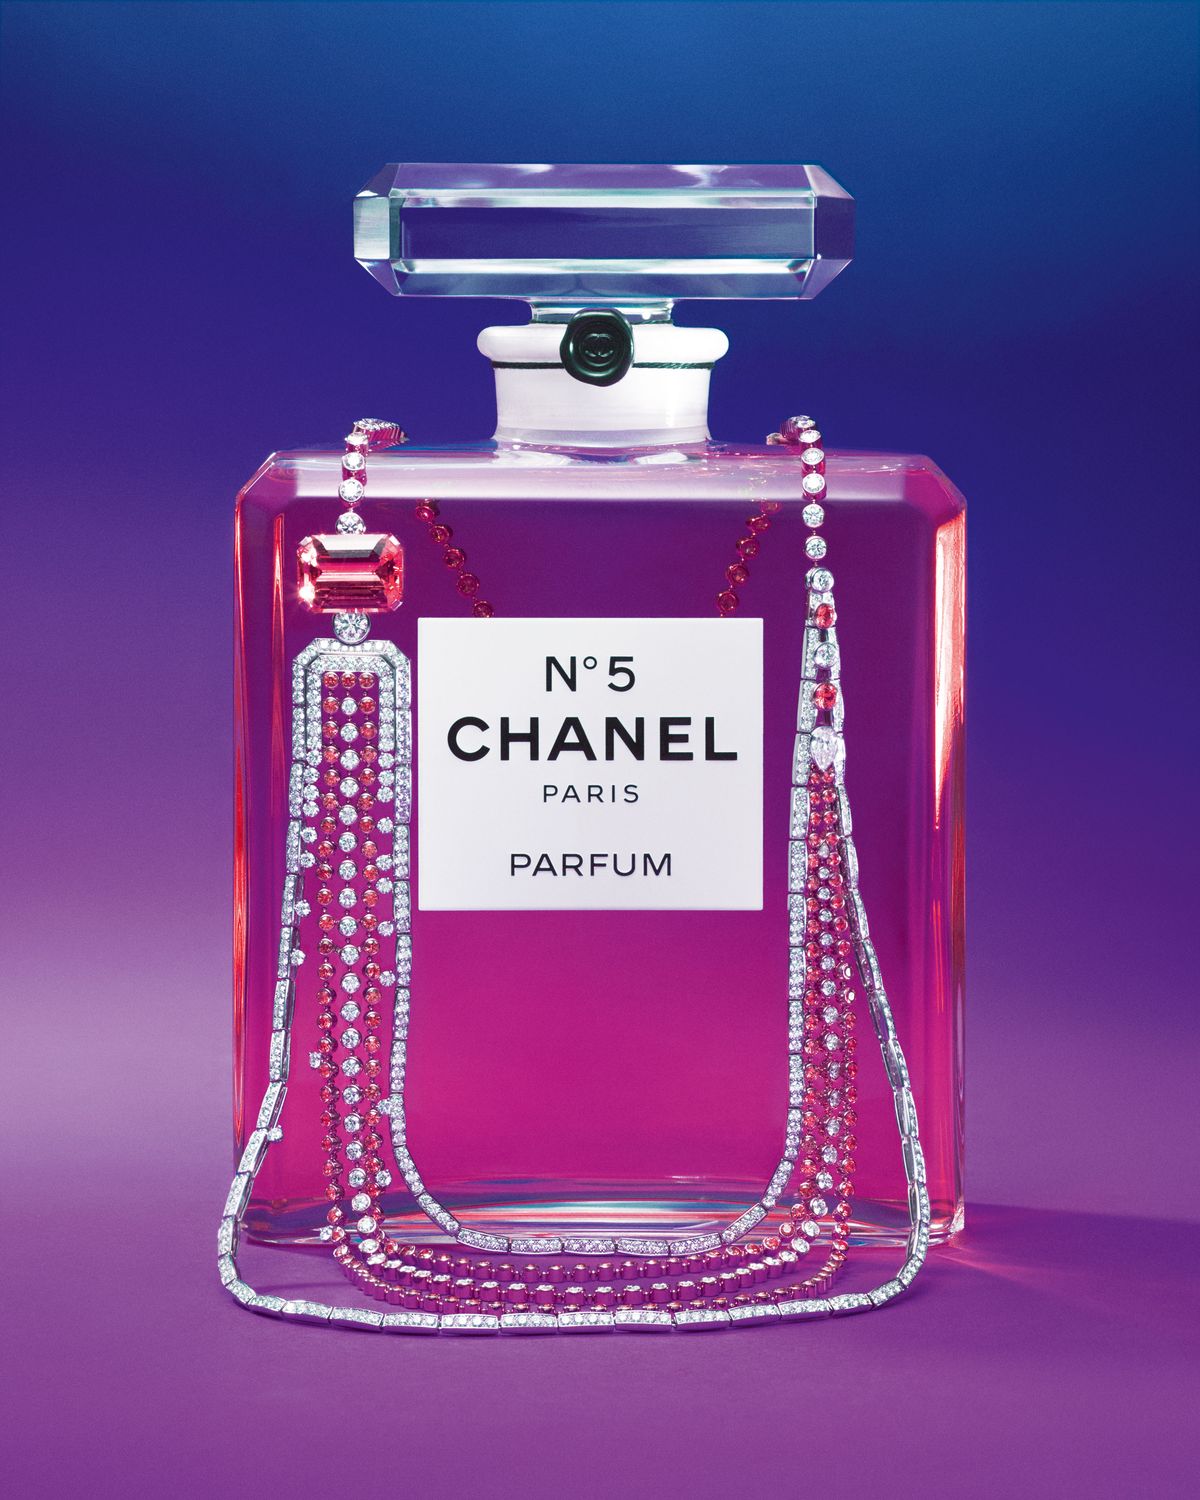 History of Chanel No. 5 - How a Legendary Perfume Stayed on Top